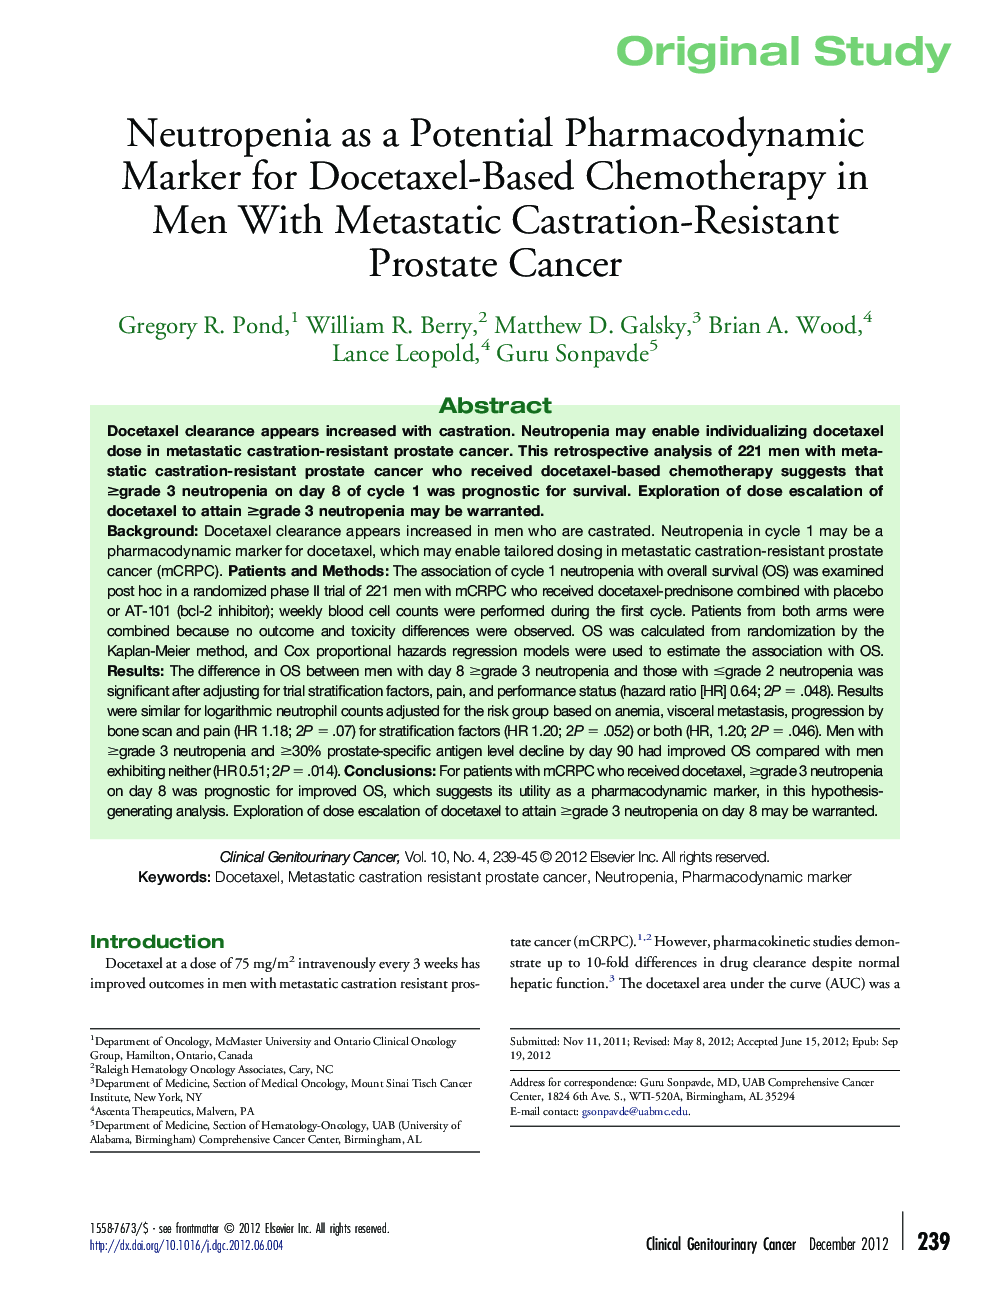 Neutropenia as a Potential Pharmacodynamic Marker for Docetaxel-Based Chemotherapy in Men With Metastatic Castration-Resistant Prostate Cancer